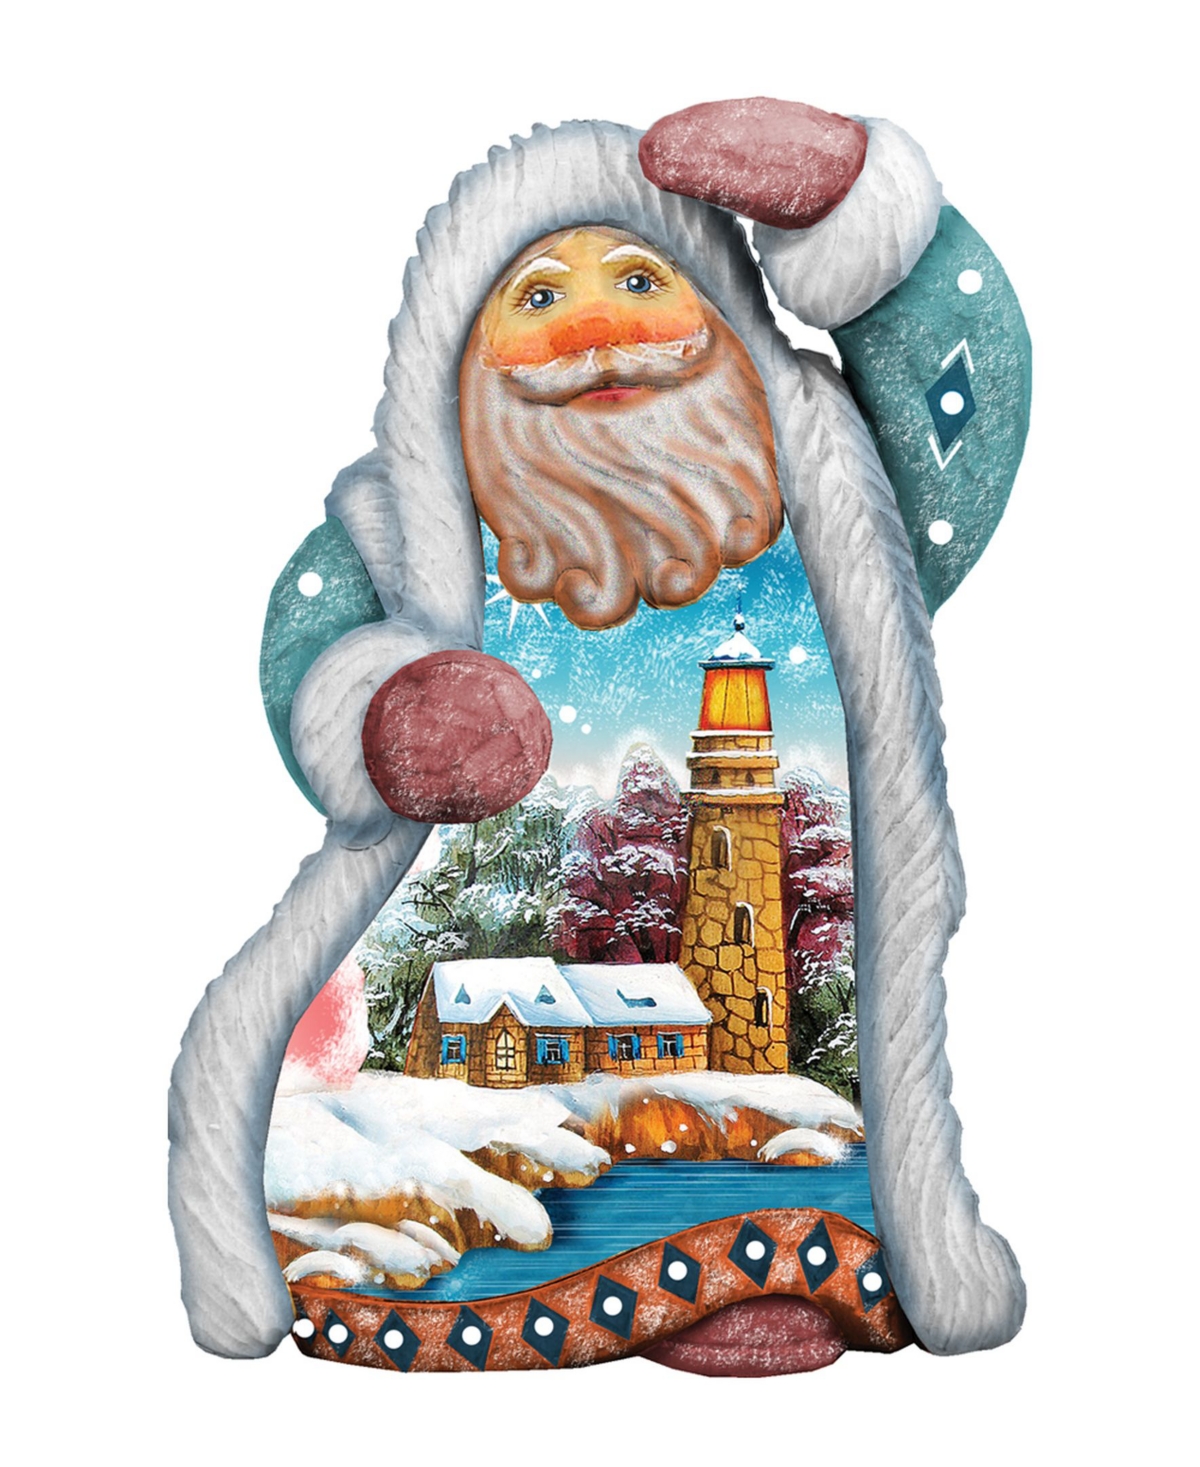 Hand Painted Santa Lighthouse Ornament Figurine with Scenic Painting - Multi